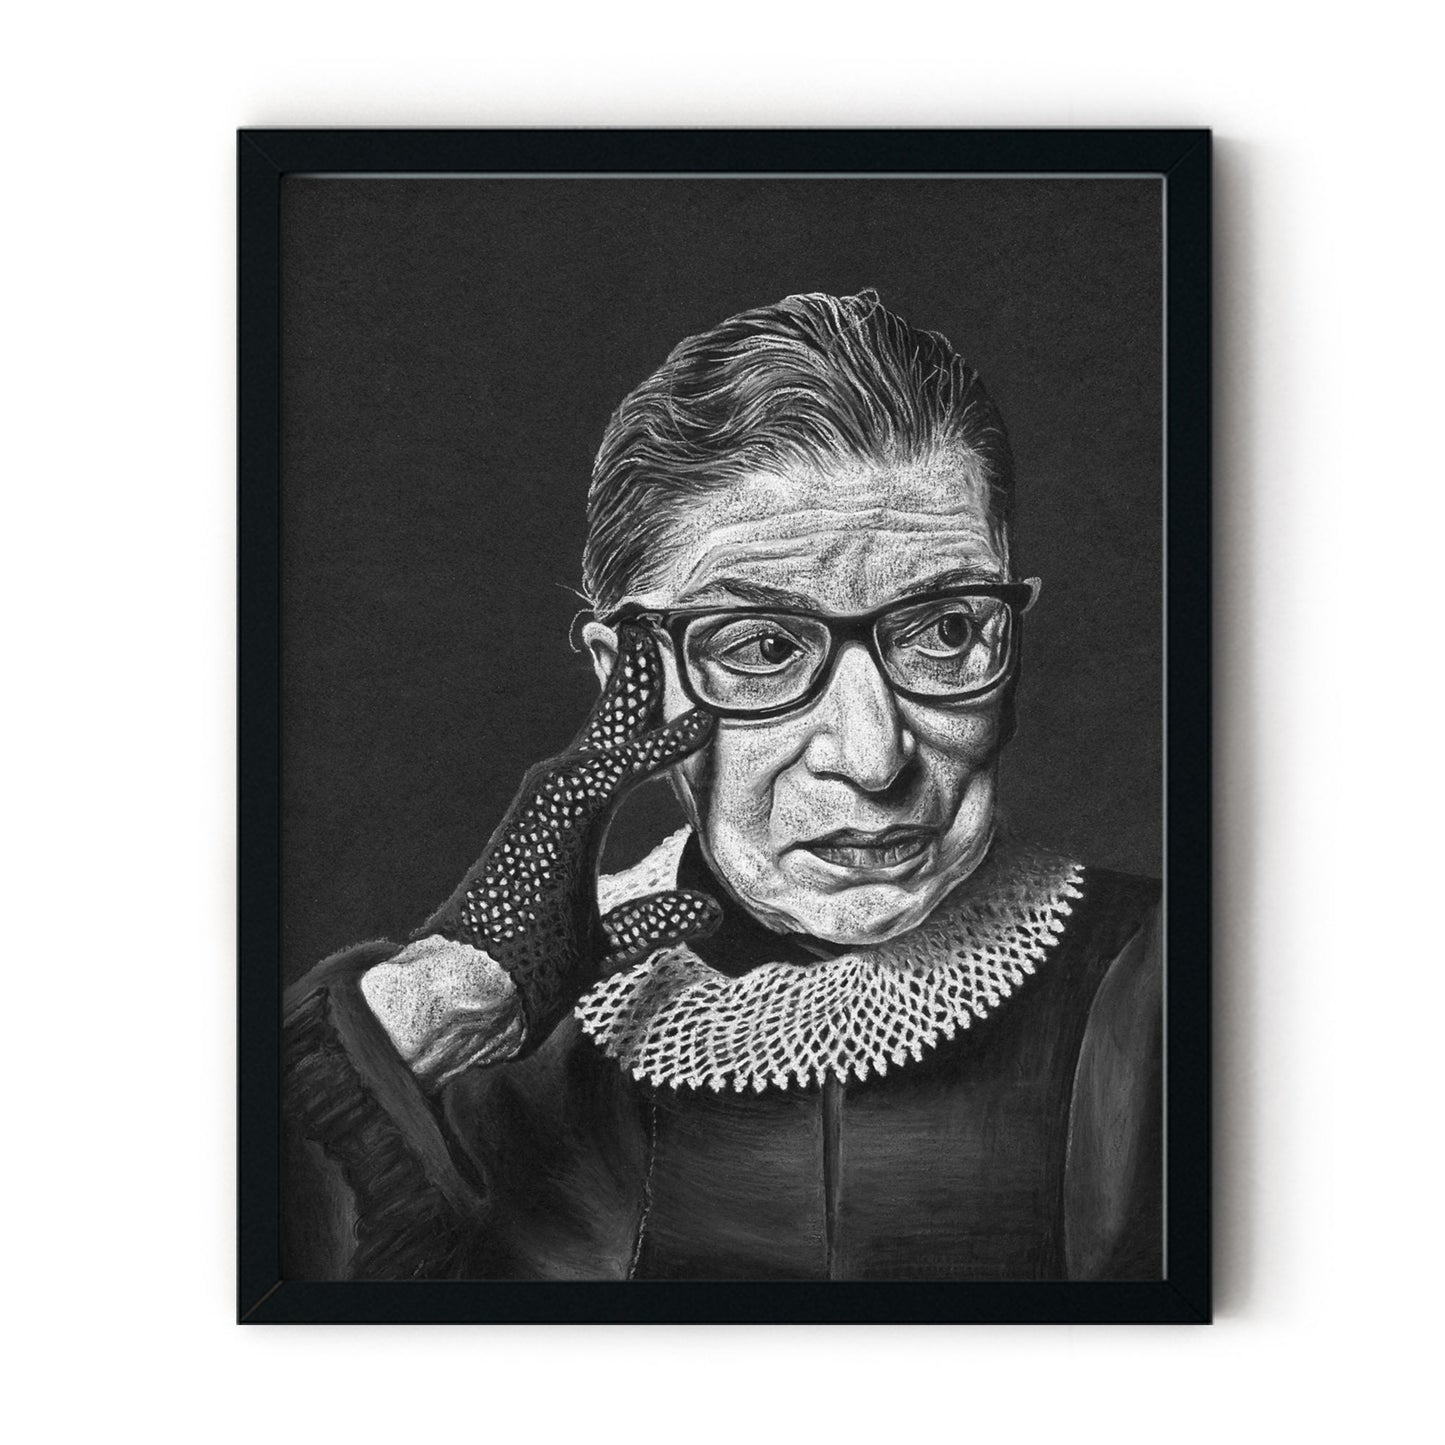 Ruth Bader Ginsburg art print, black frame without mat - Candid Almond